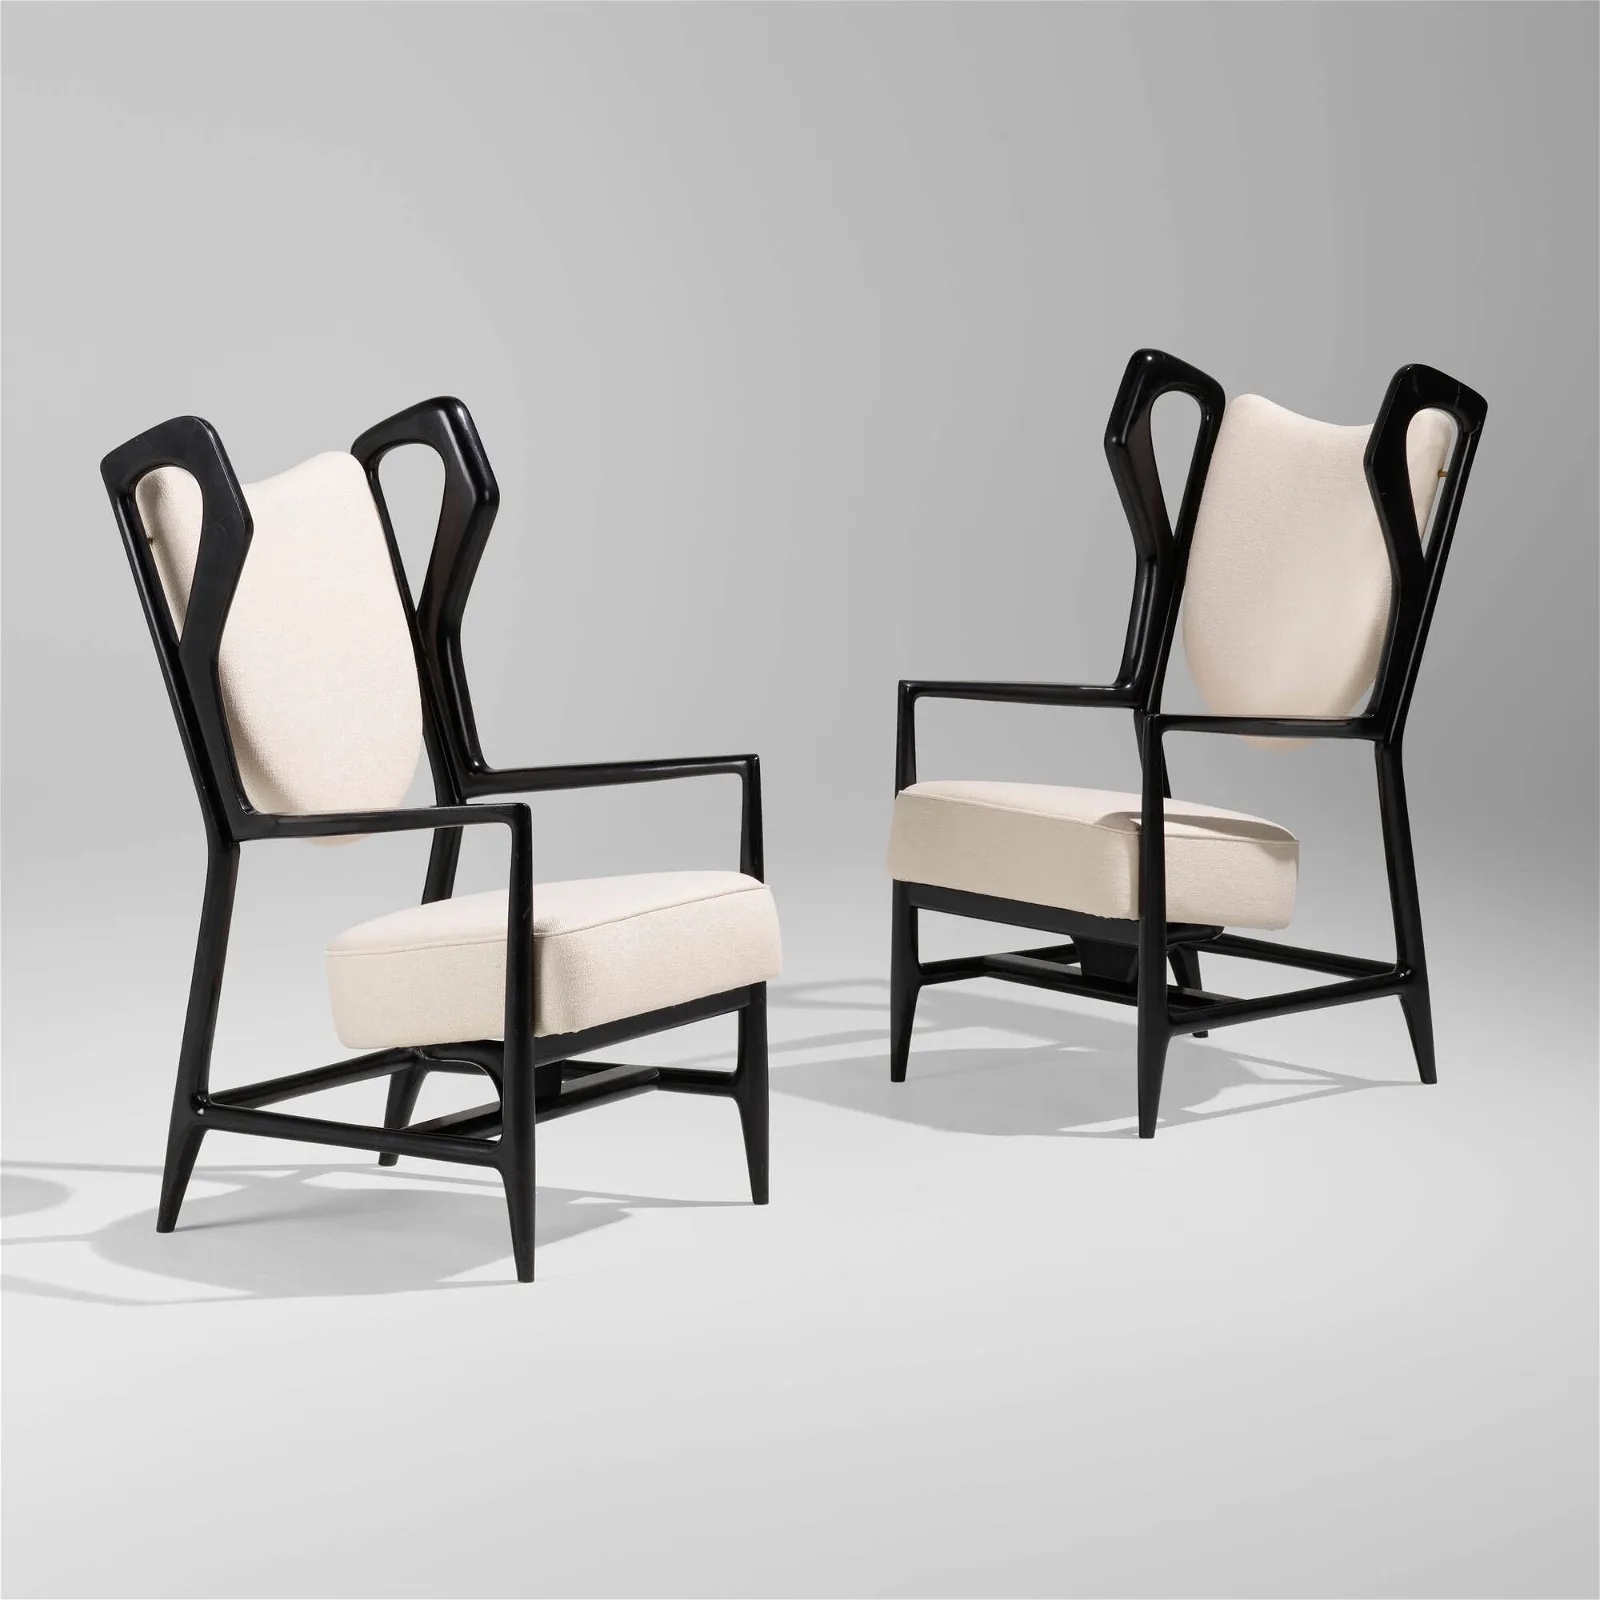 Gio Ponti, Triennale armchairs, estimated at $70,000-$90,000 at Wright.
